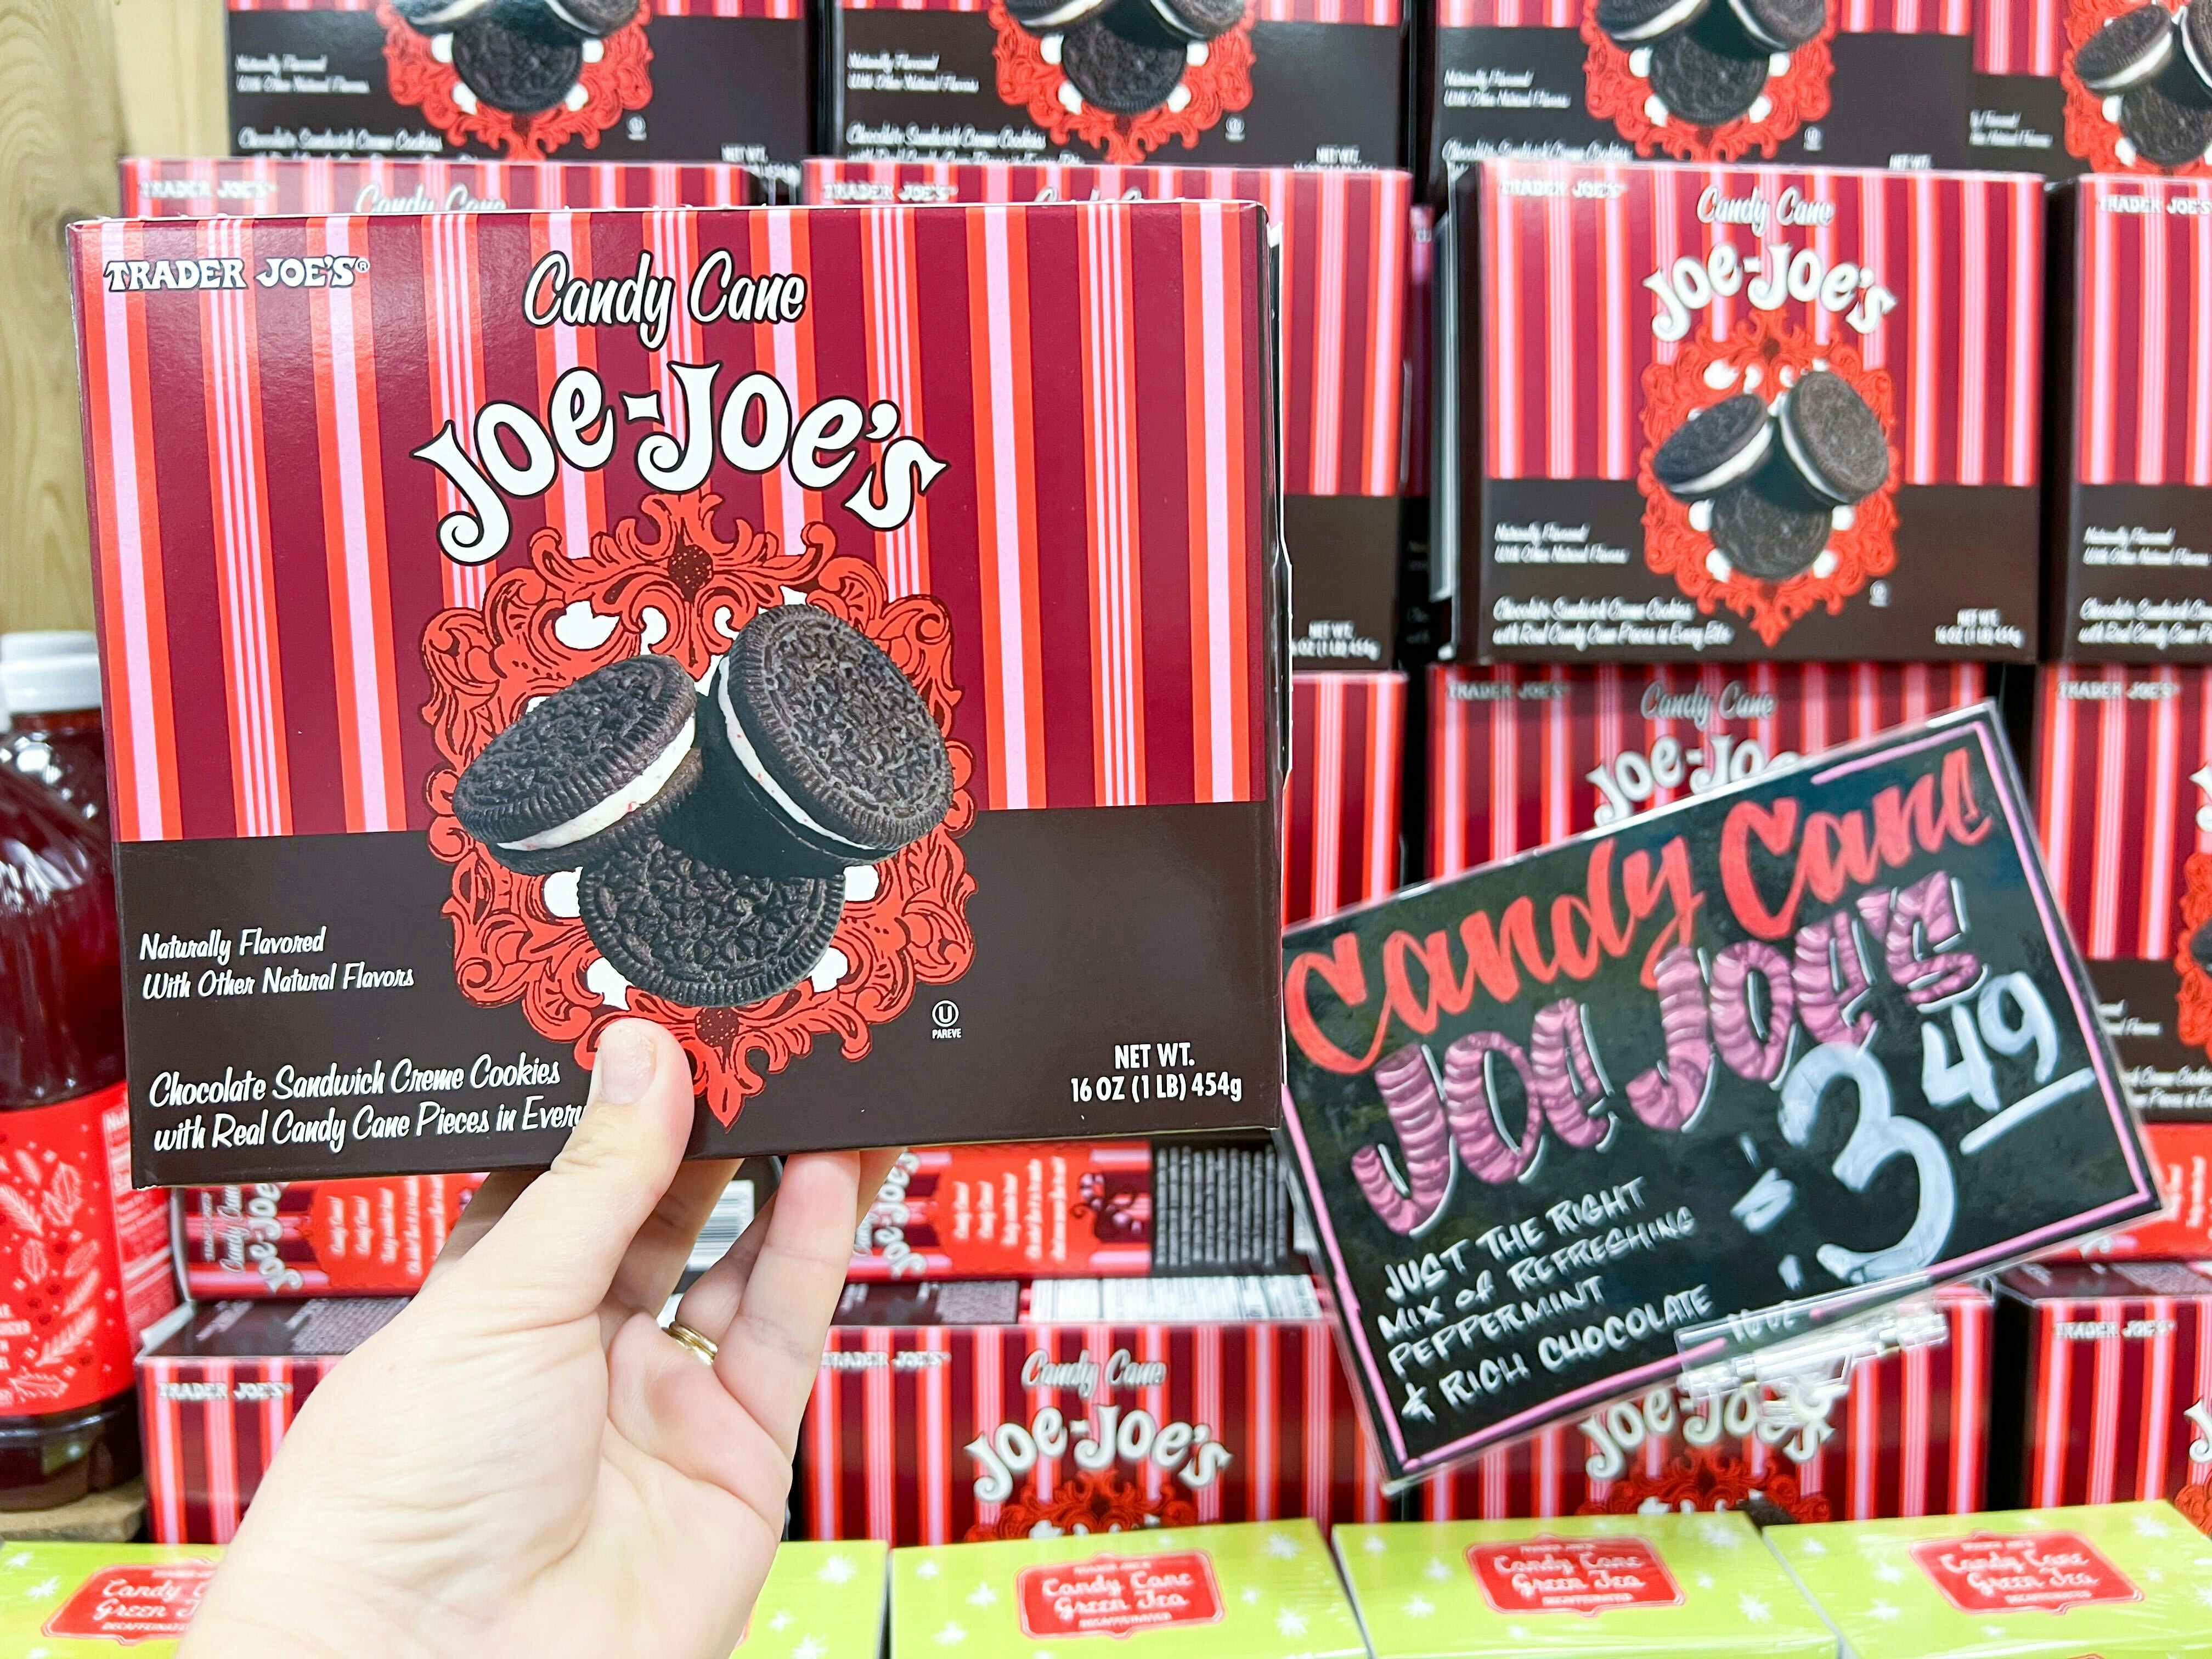 hand holding a box of Trader Joe's Candy Cane Joe-Joe's in front of display with sale price in front